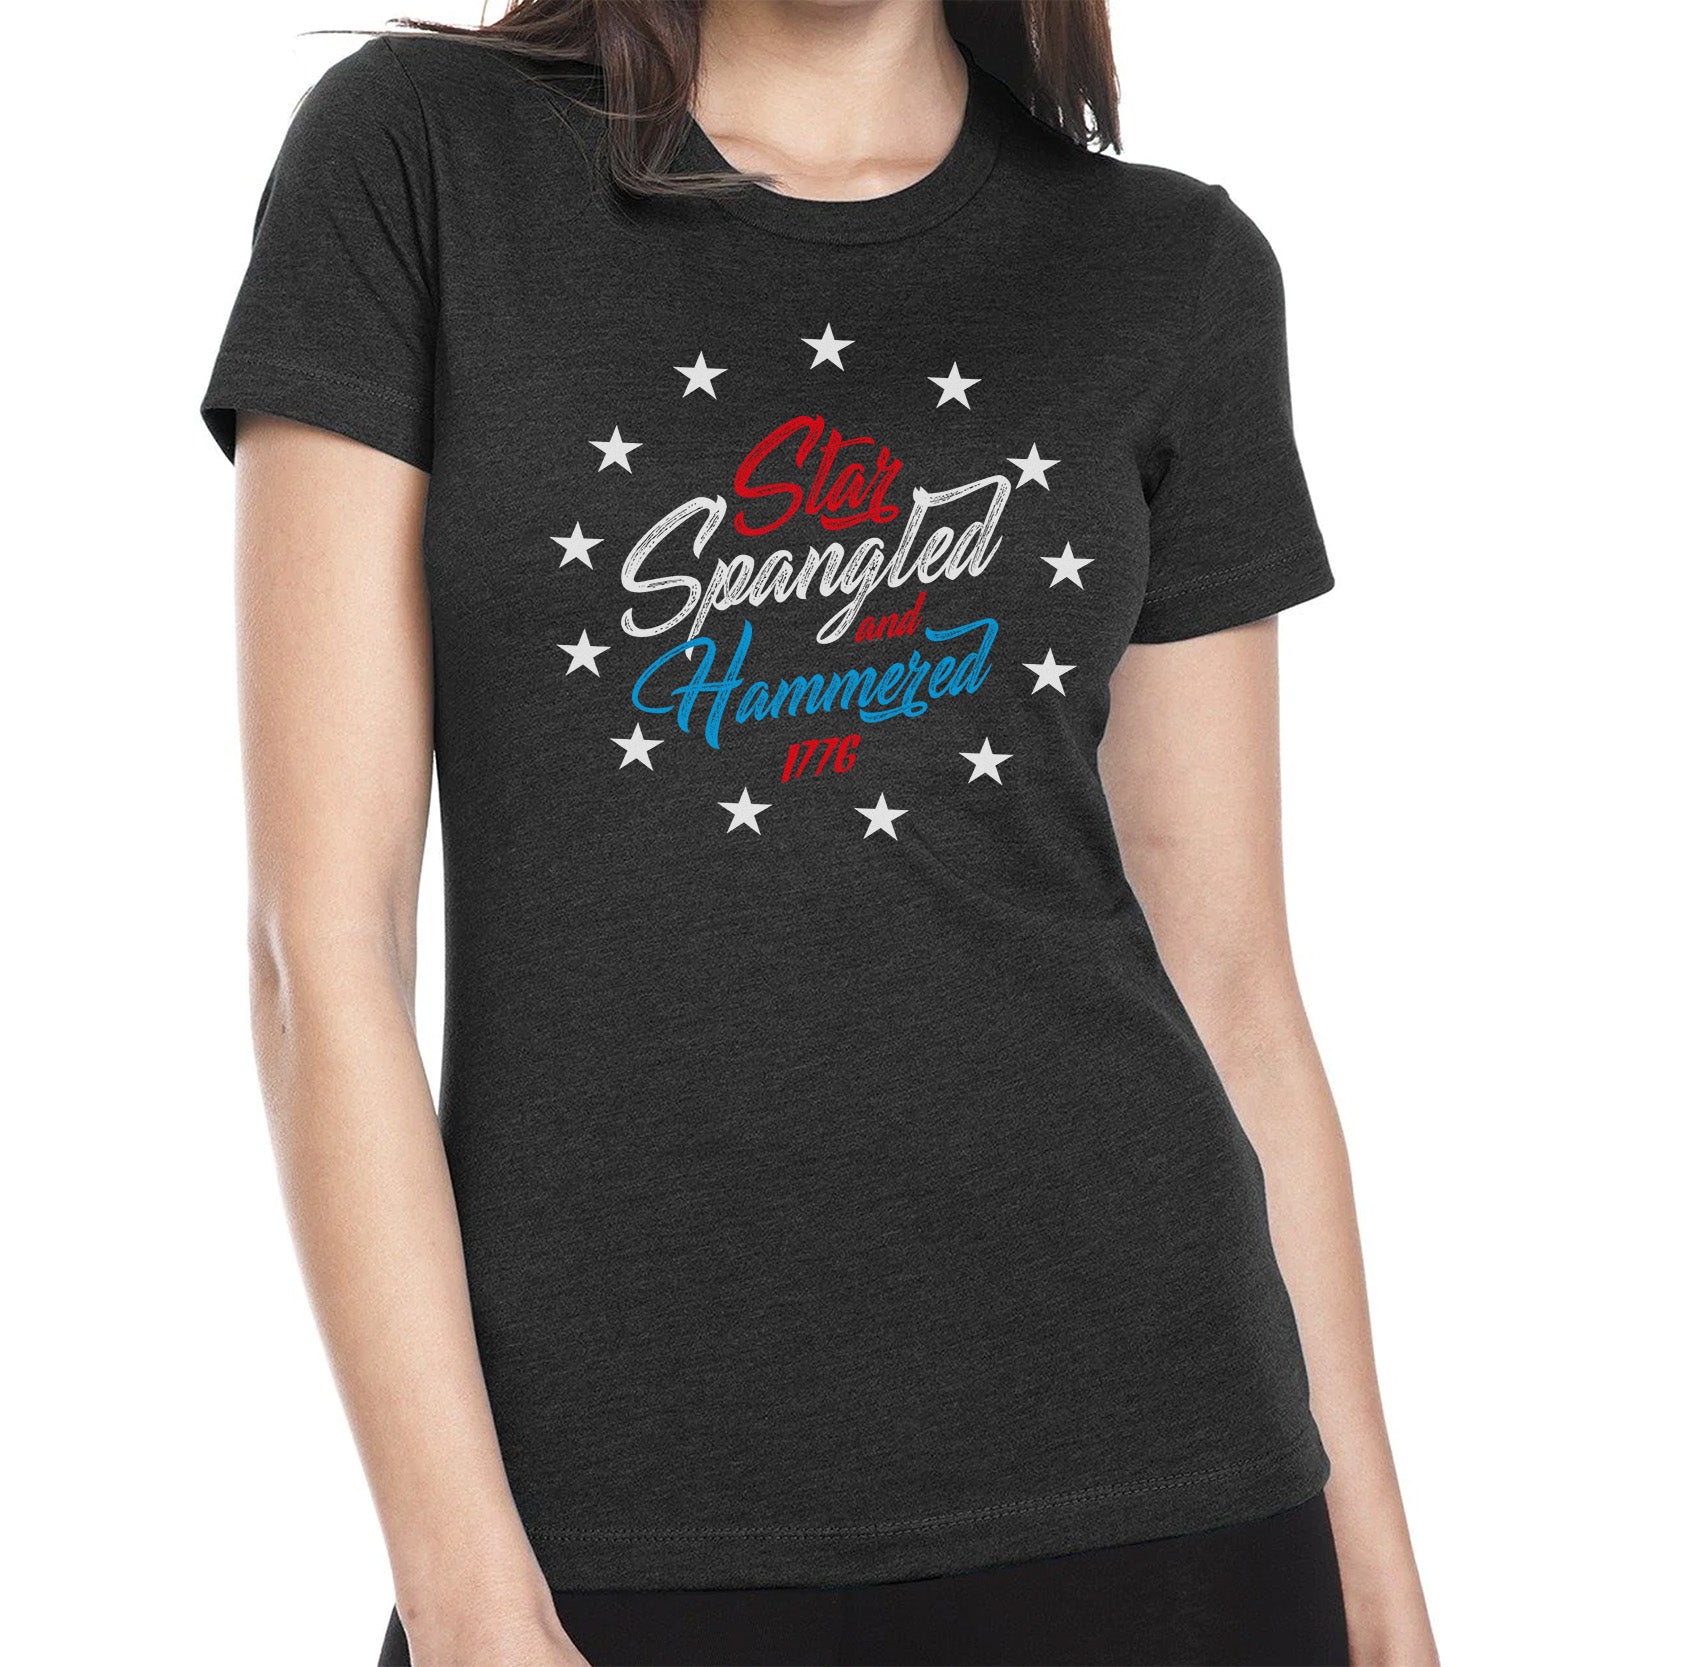 Star Spangled and Hammered 1776 - Ladies Tee